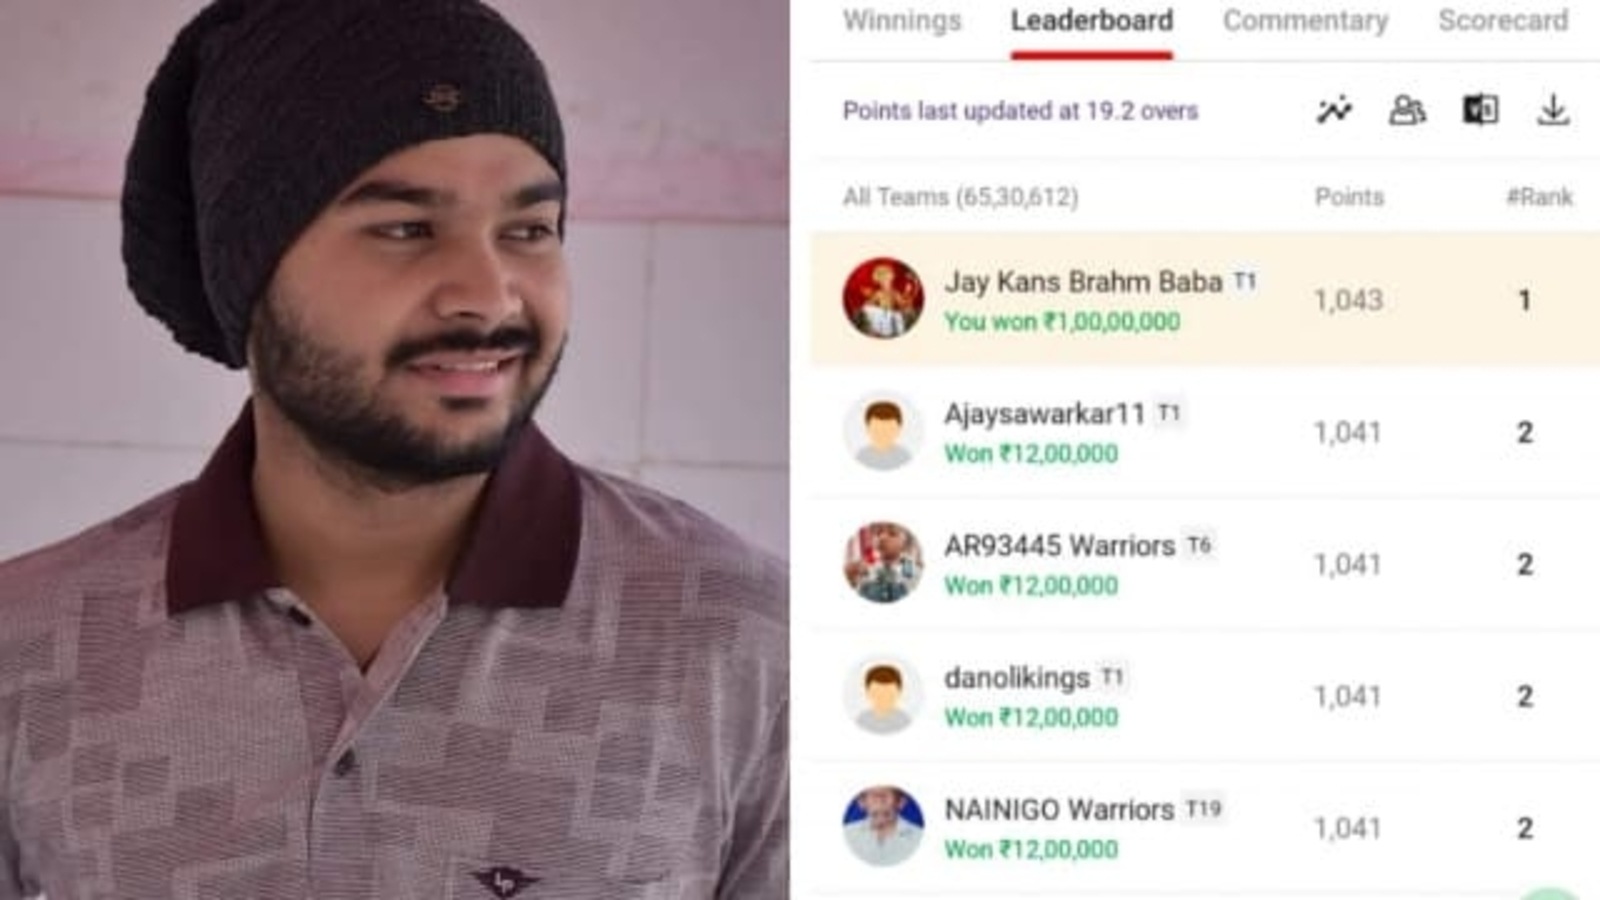 Wow! Dream 11 app awards 1 crore to Bihar youth for his dream cricket team in fantasy game Tech News